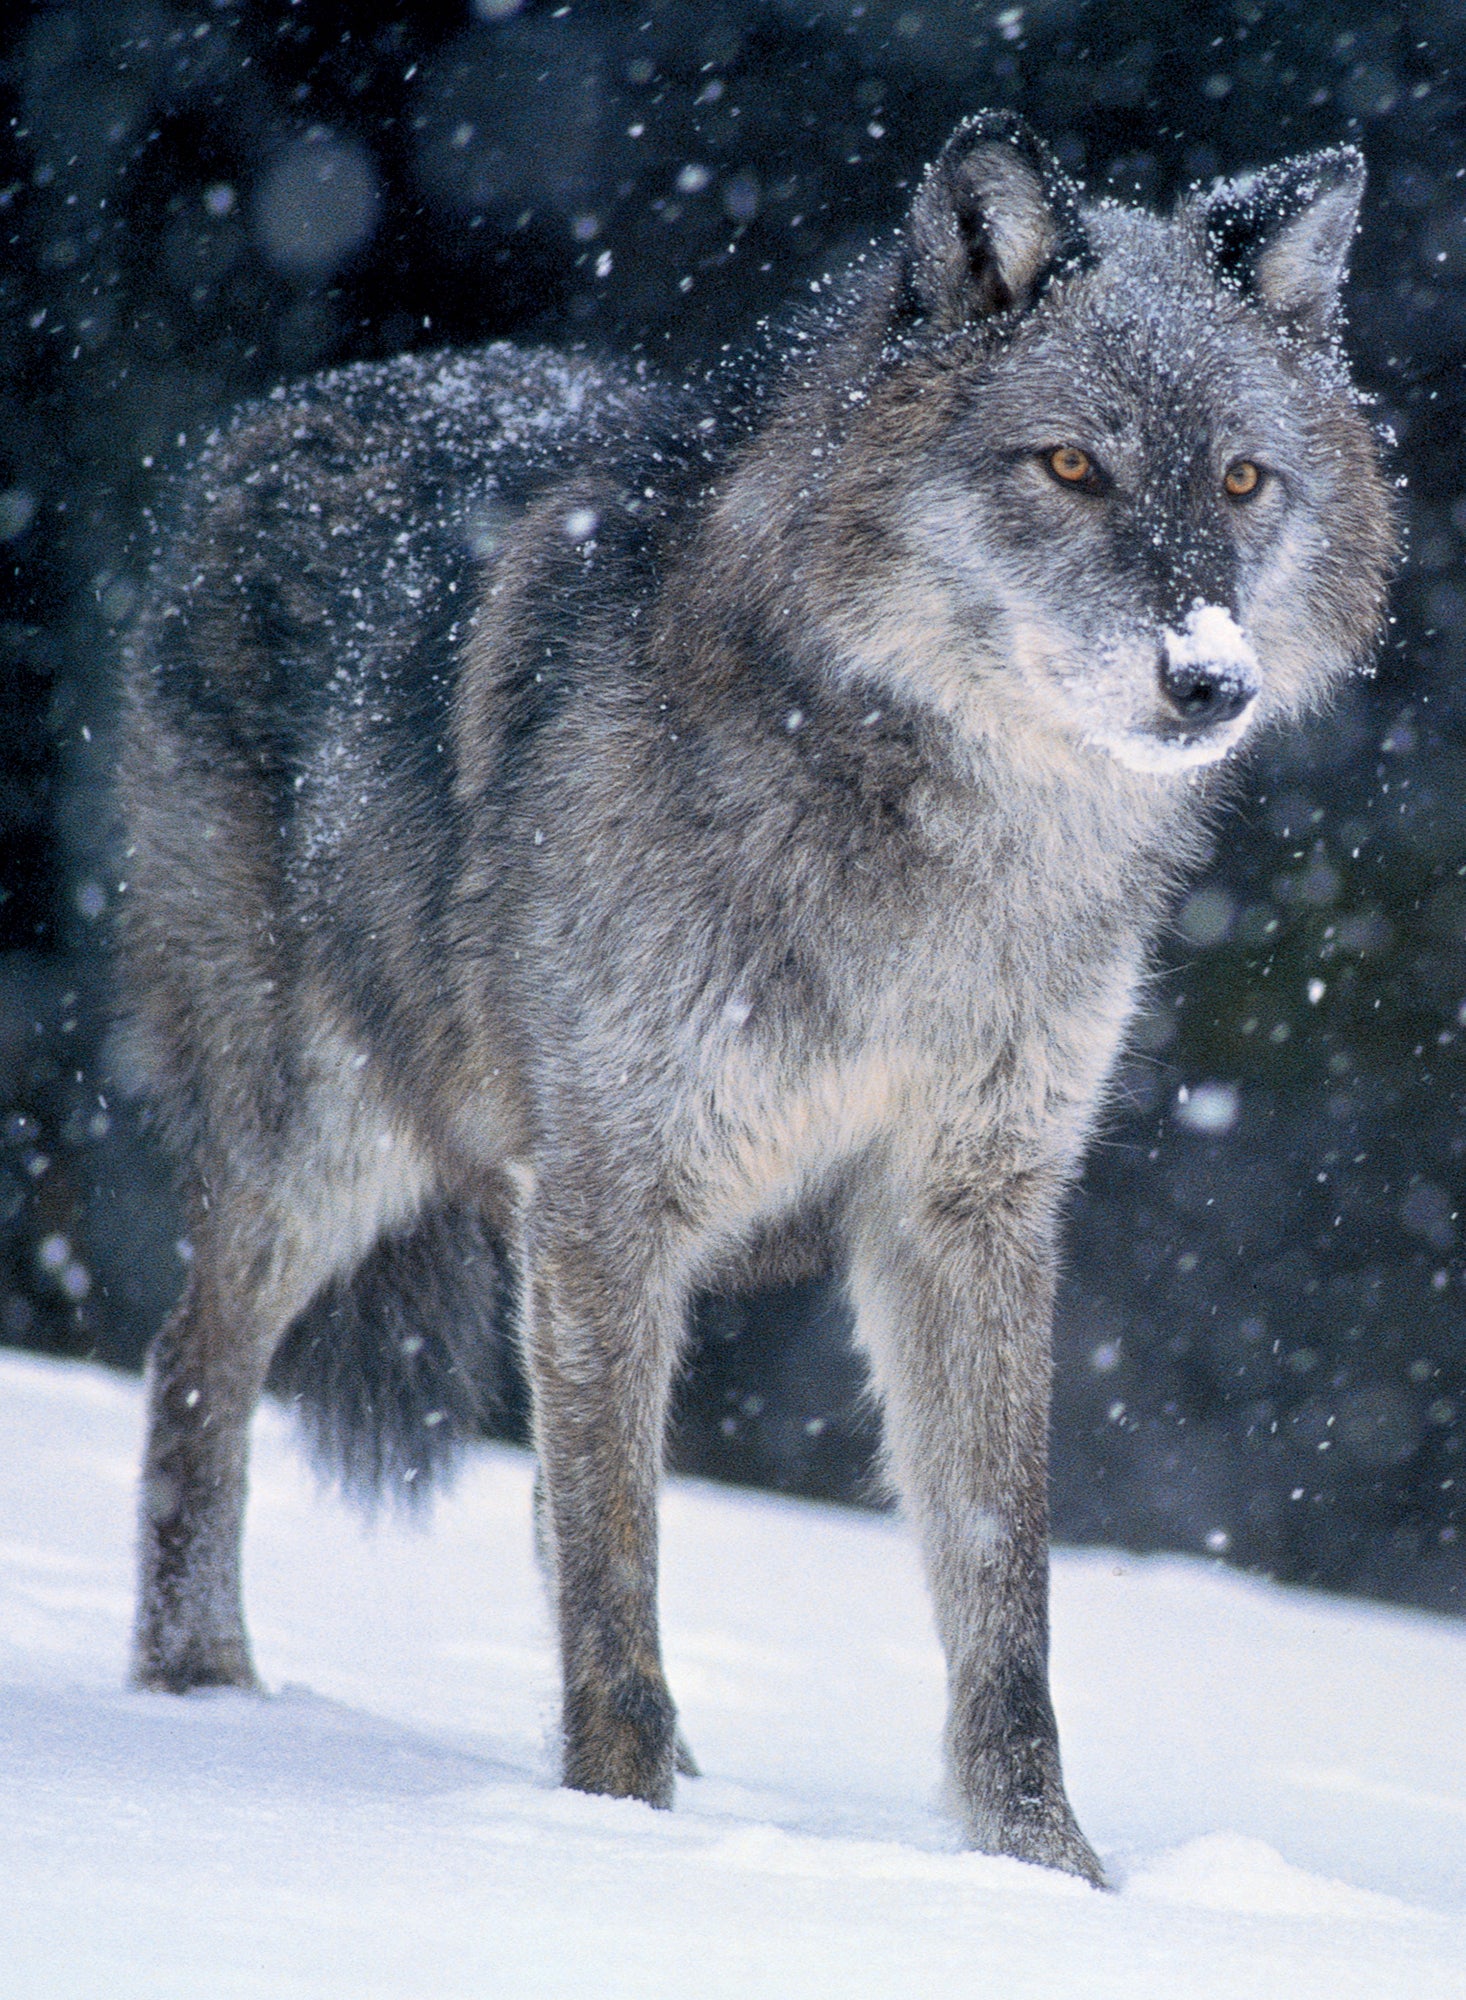 A timber wolf in the snow. End of image description.